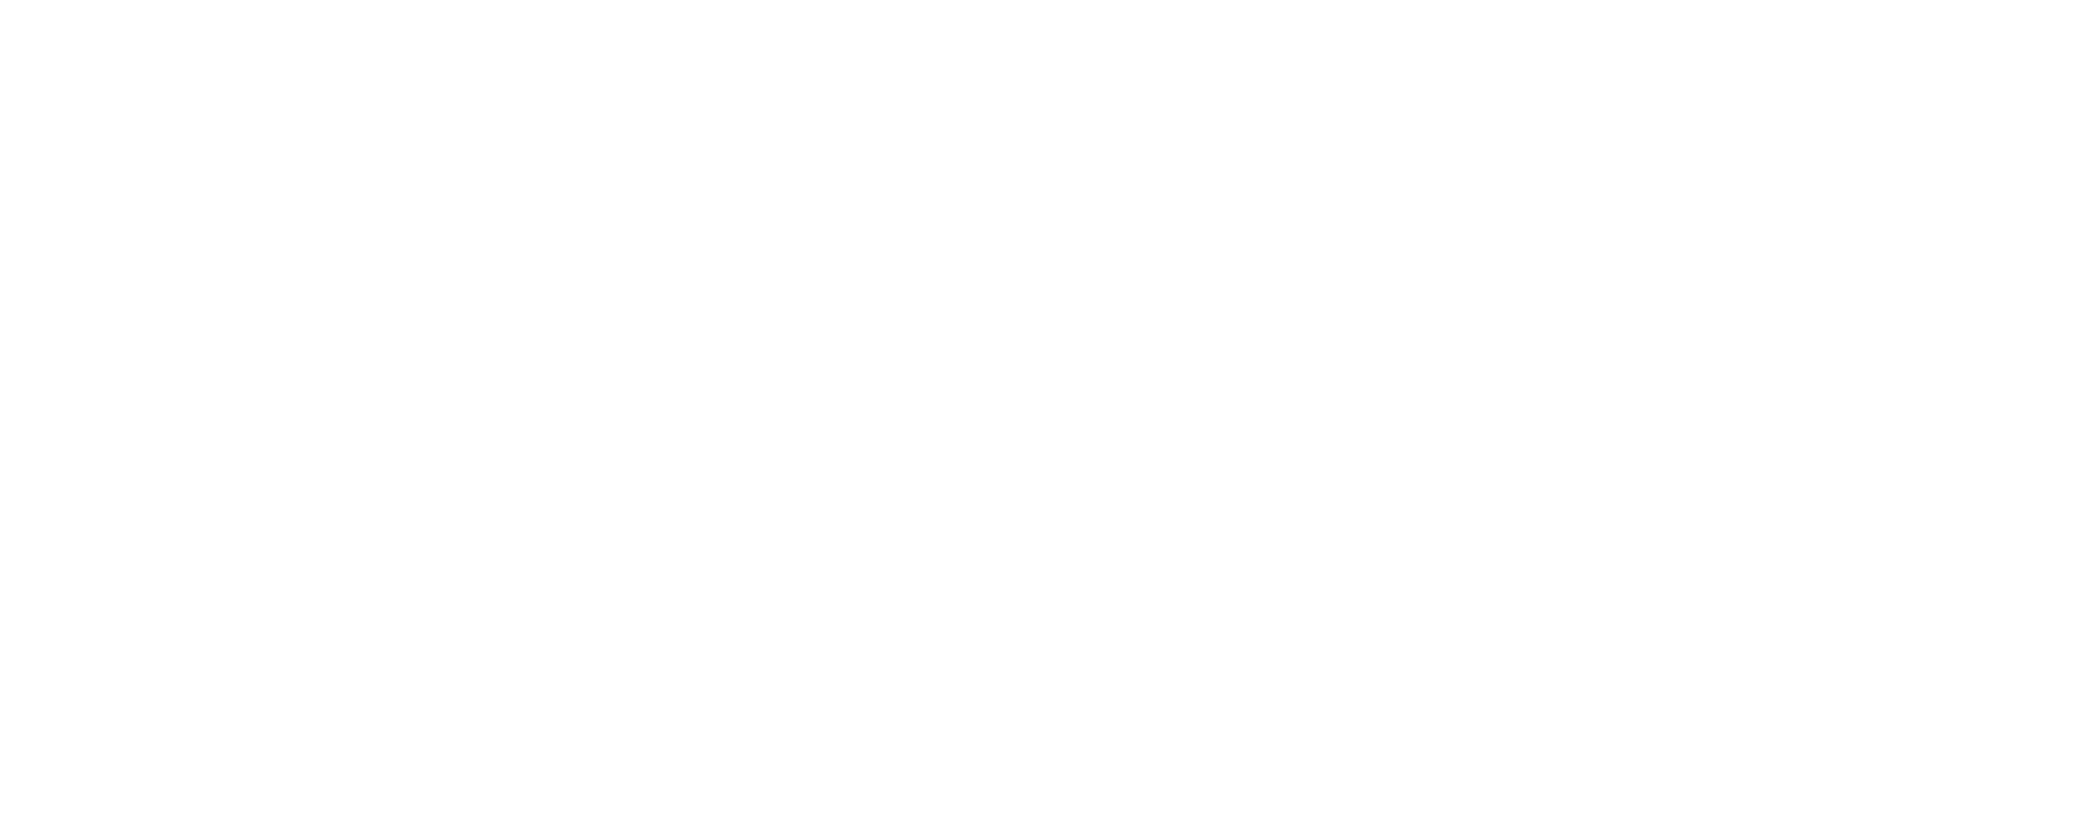 The logo for bolton field.